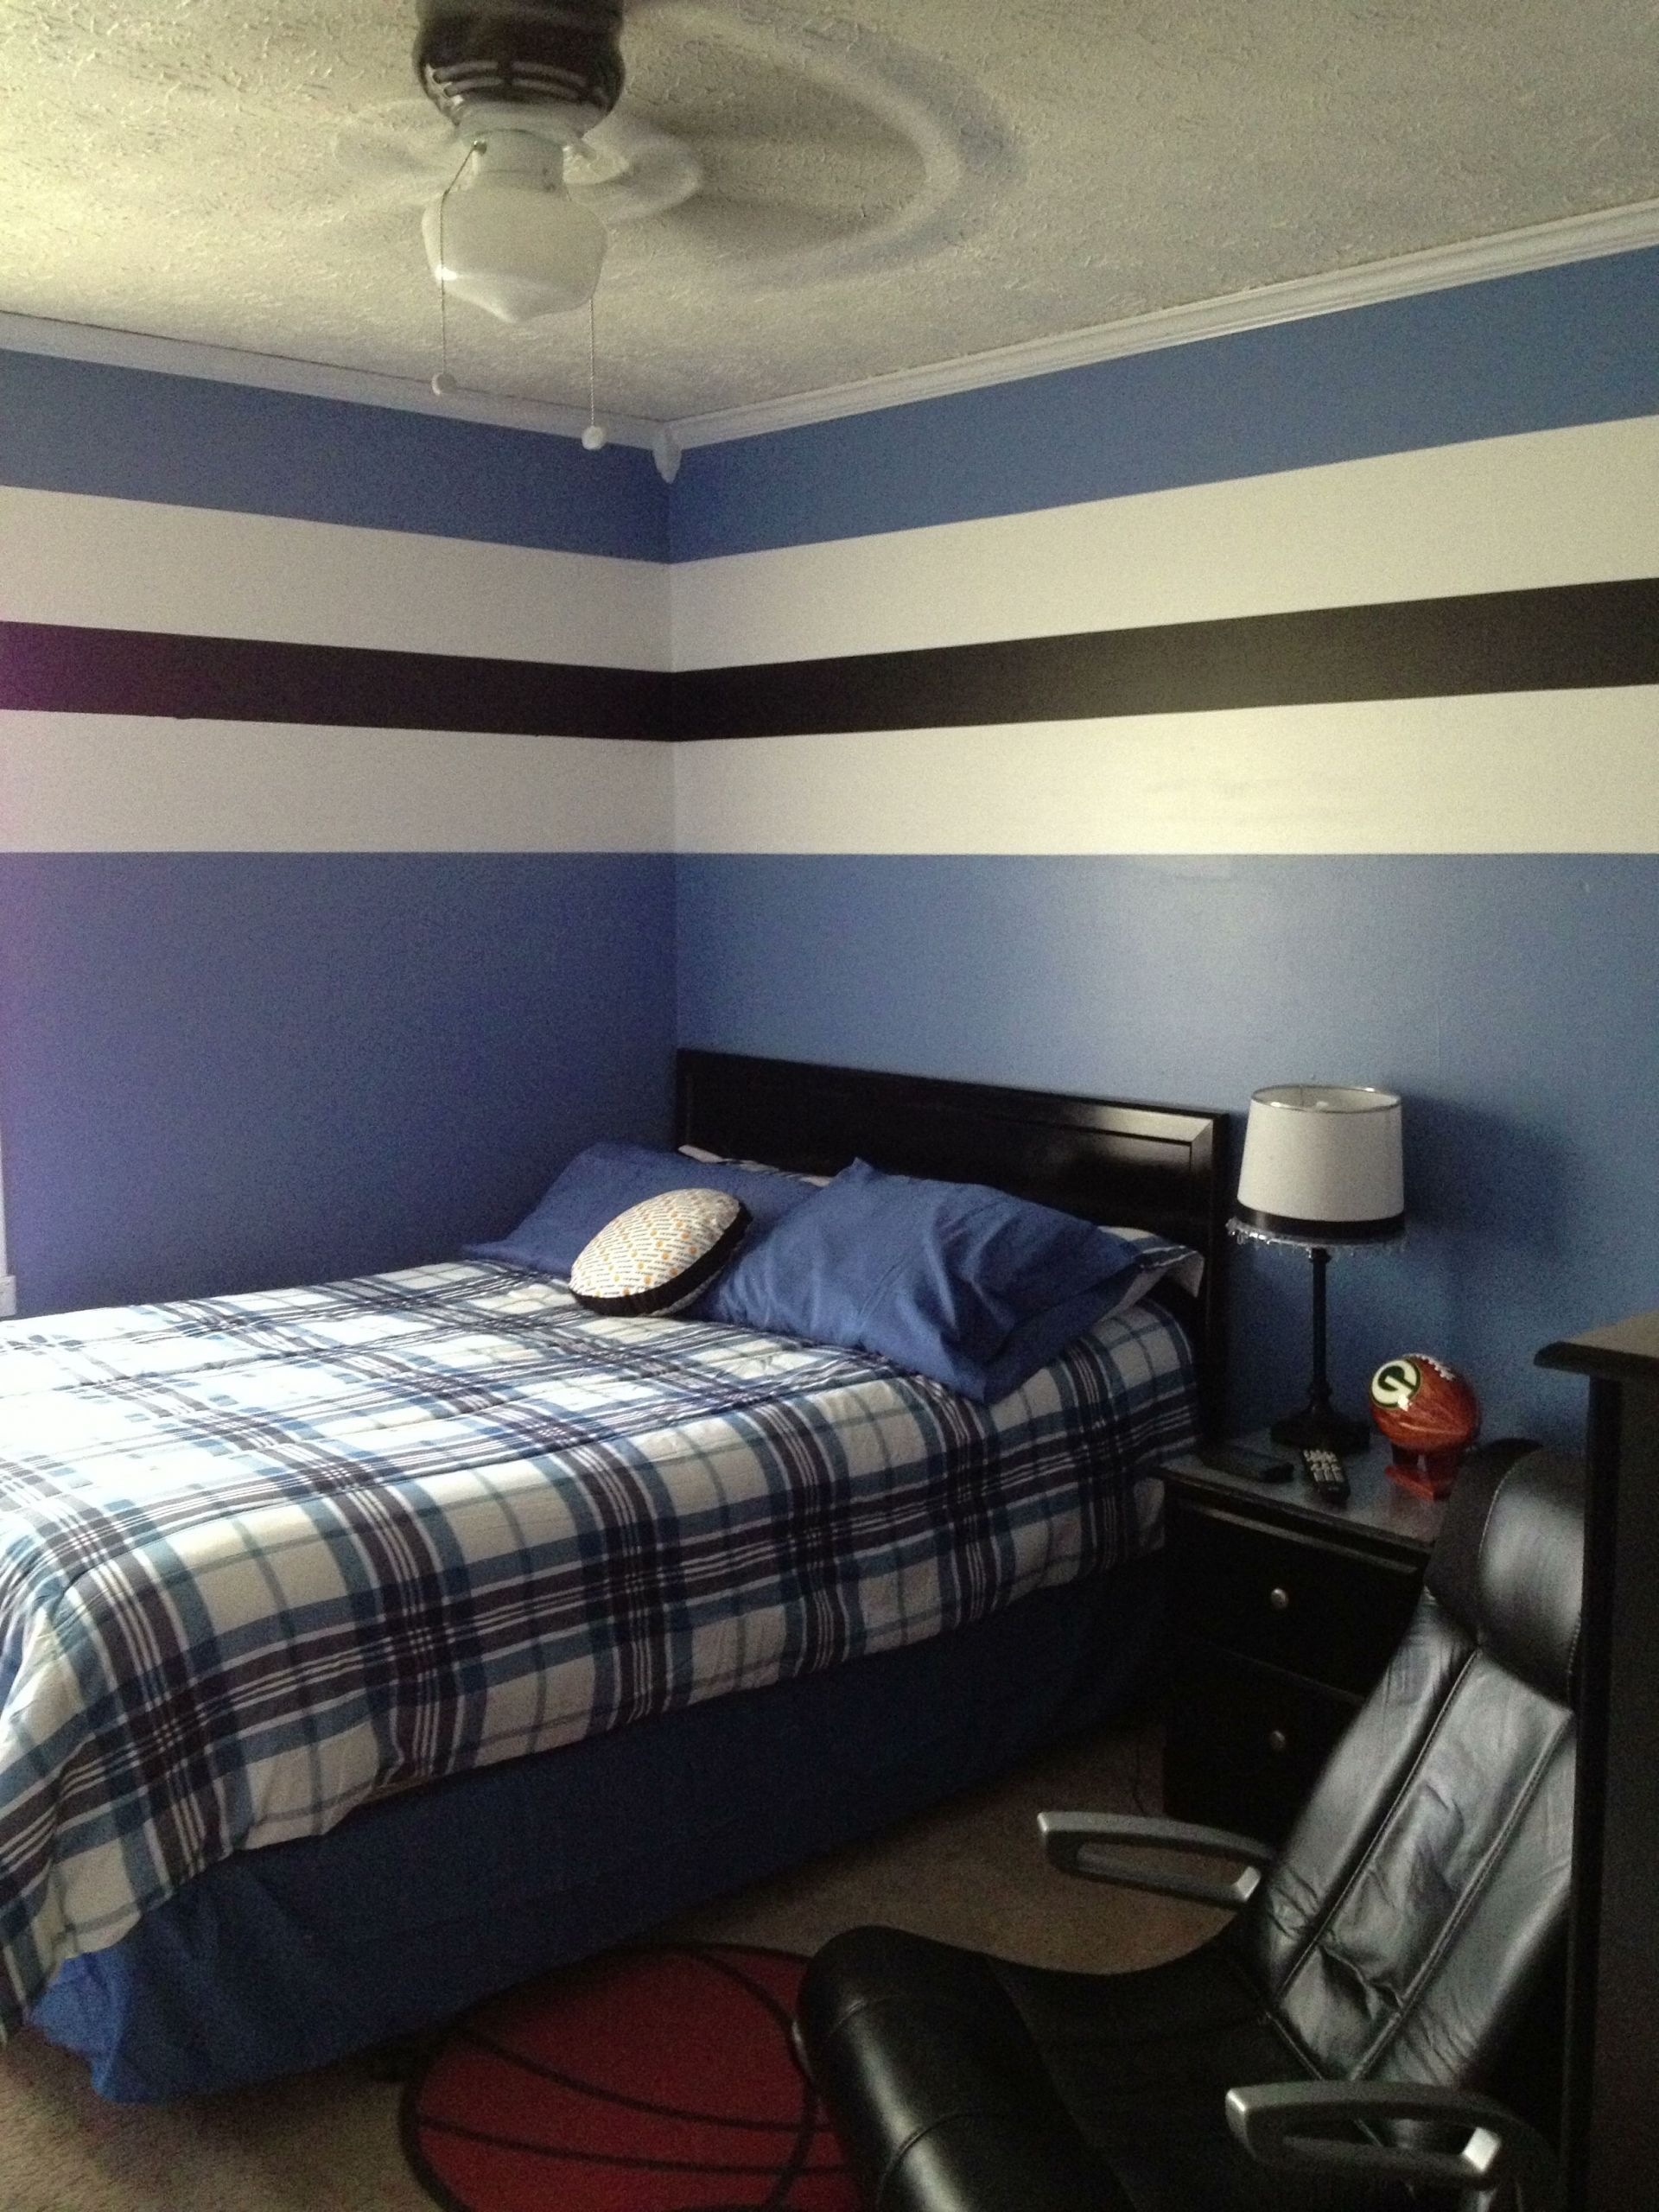 Painting Ideas For Boy Bedroom
 Pin on Son s room